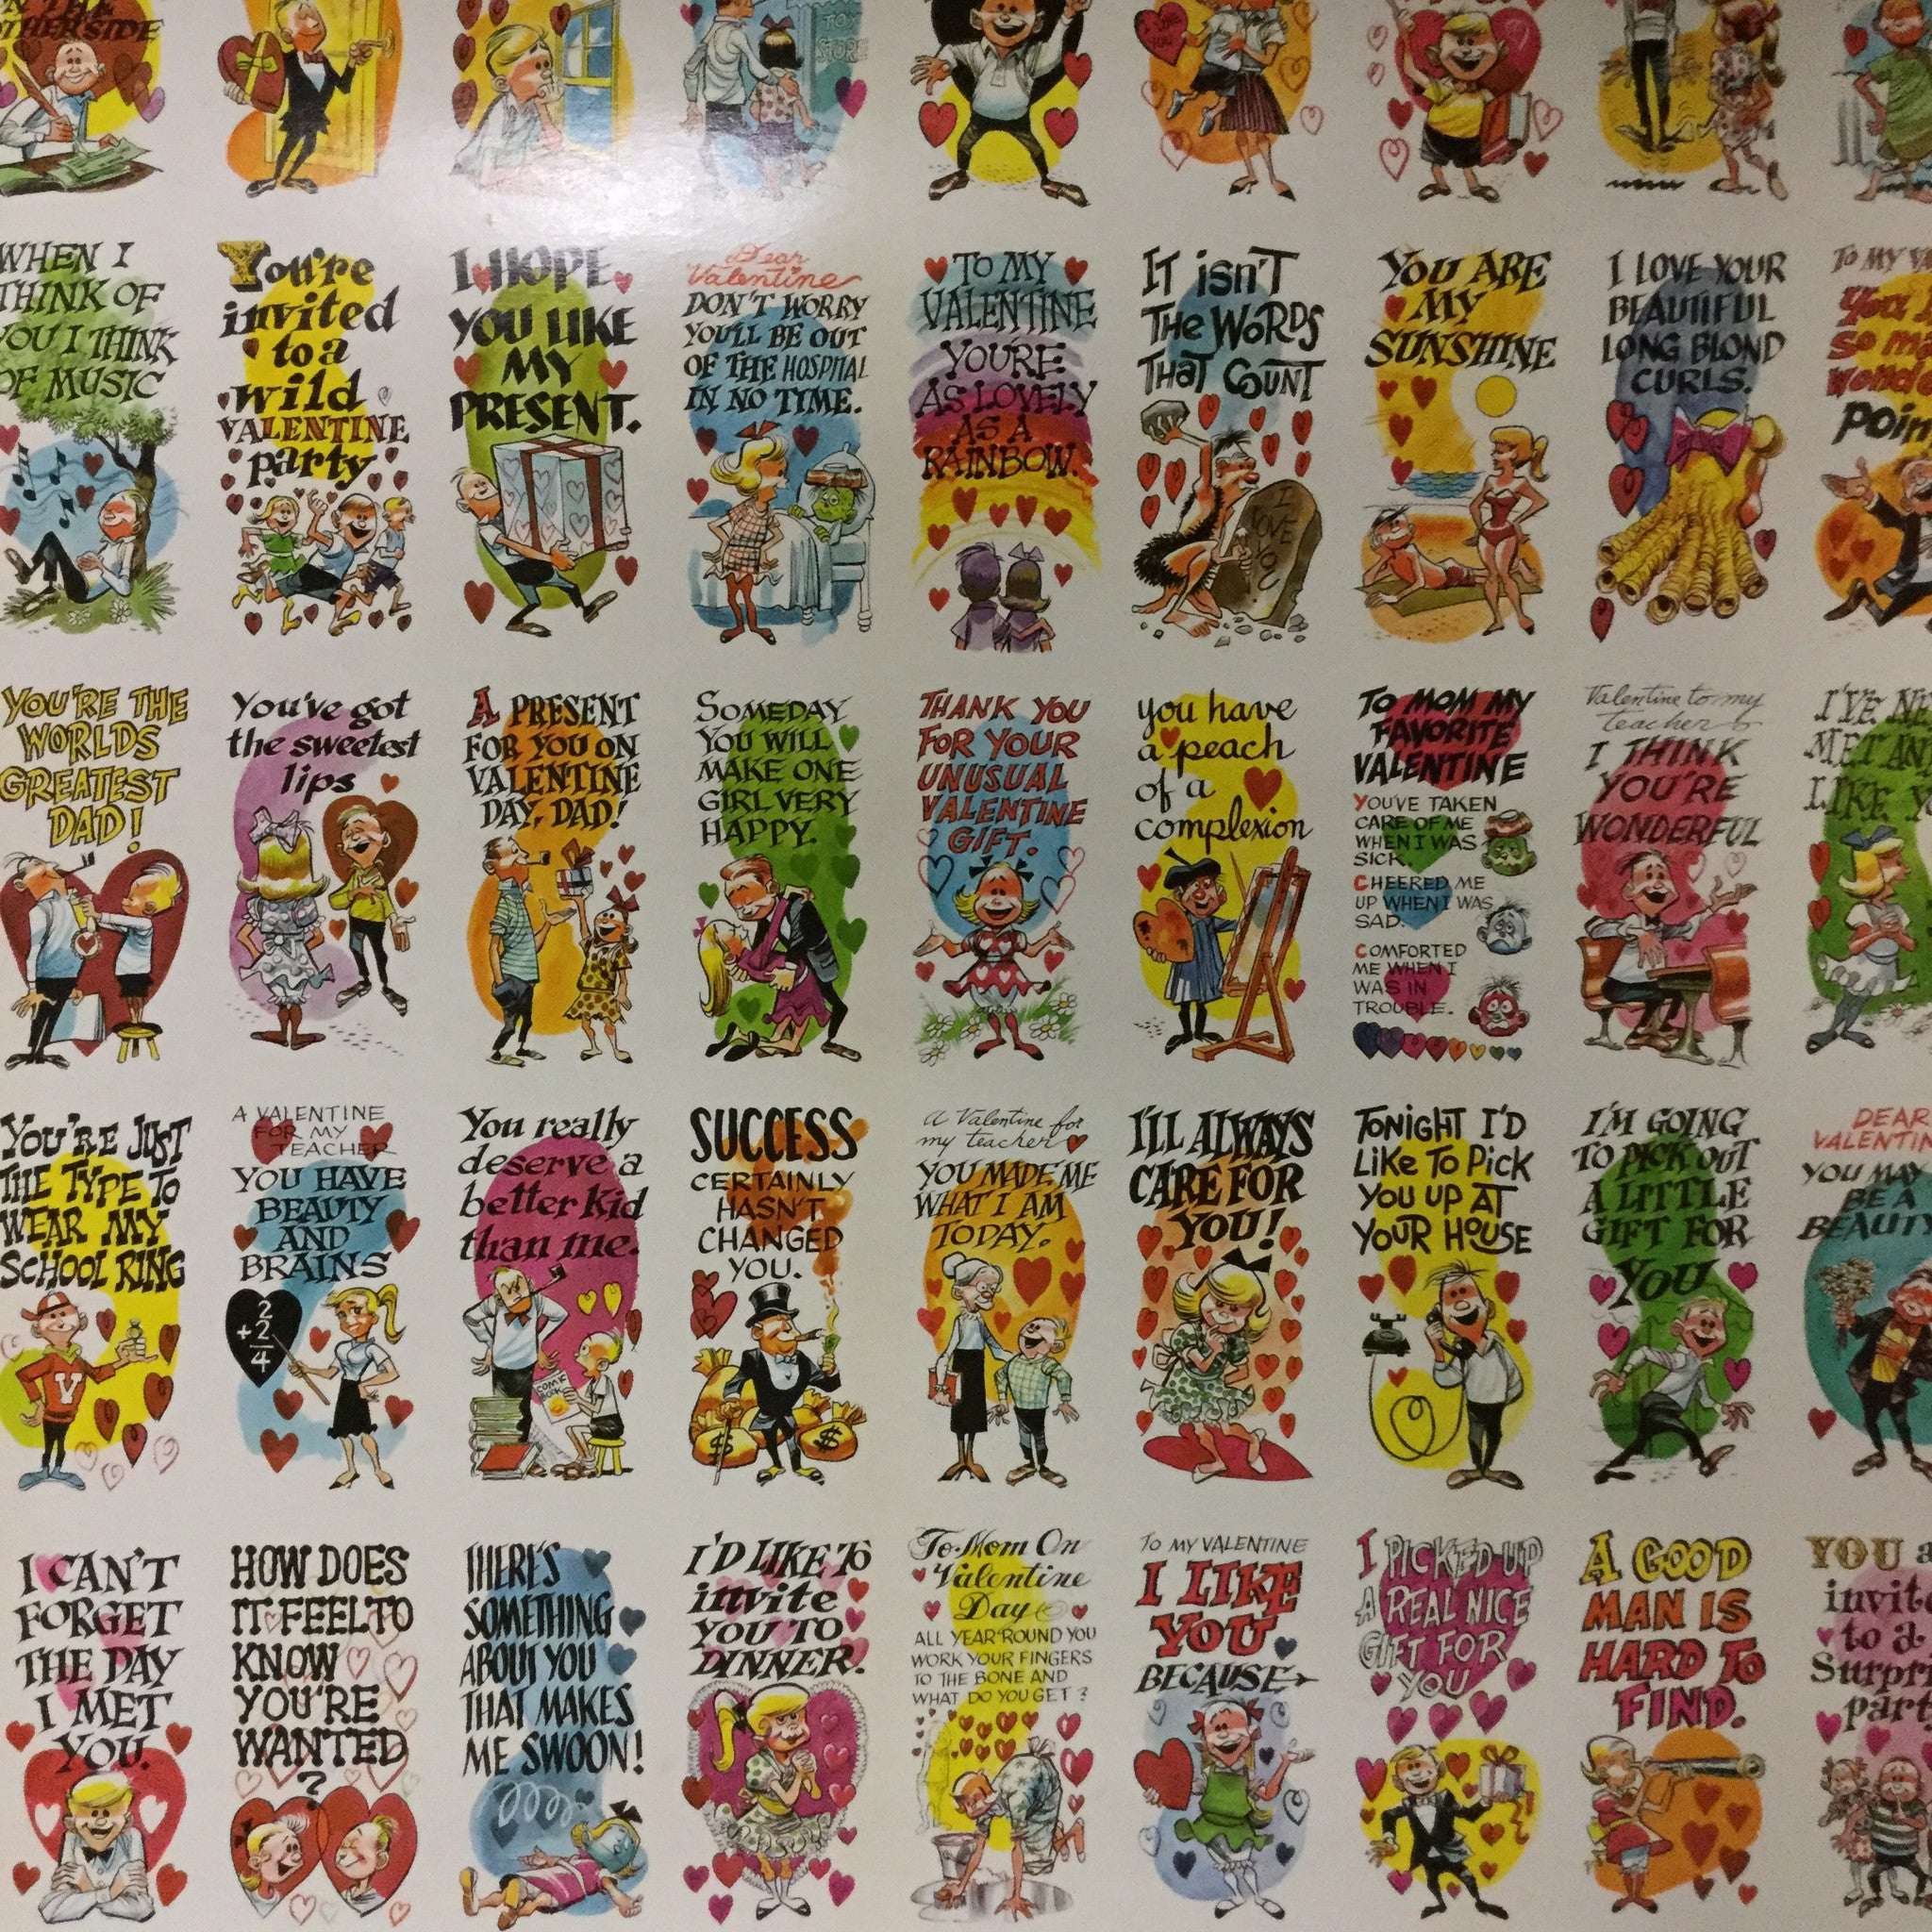 Funny Valentines rare opc printed in Canada uncut card sheet 1960s